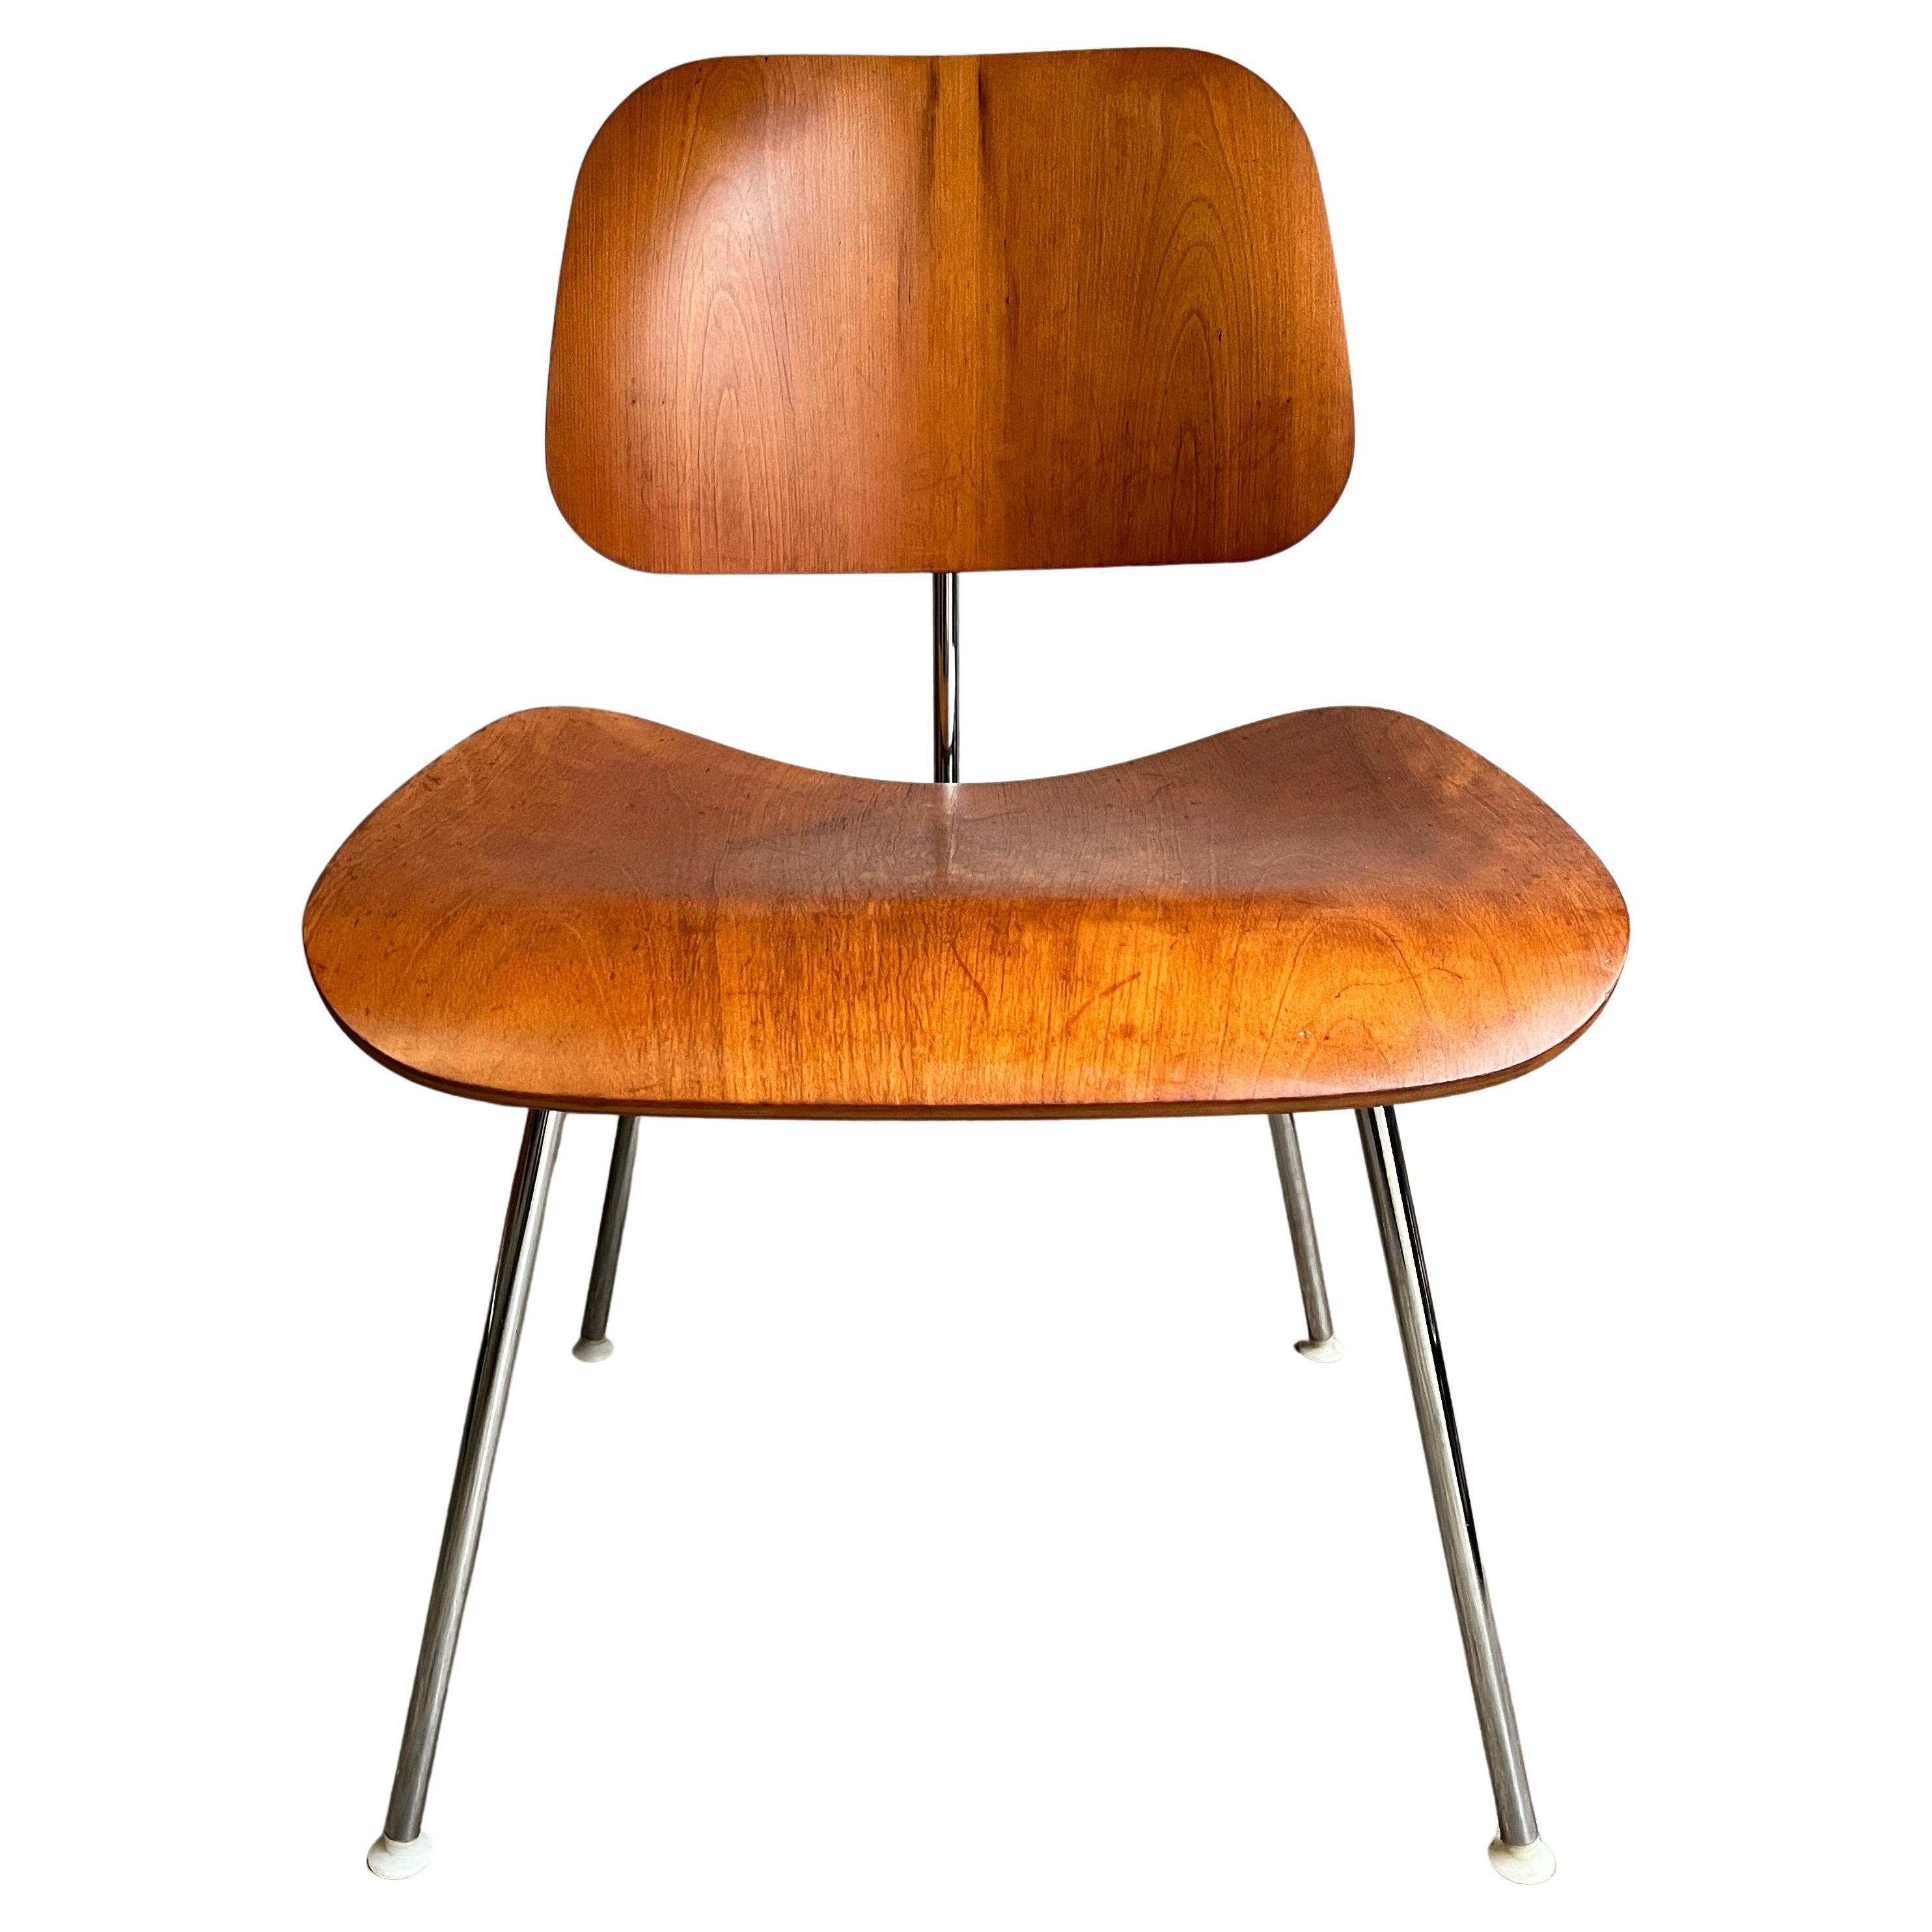 Eames "DCM" Molded Plywood Chairs for Herman Miller in Rare Cherry For Sale